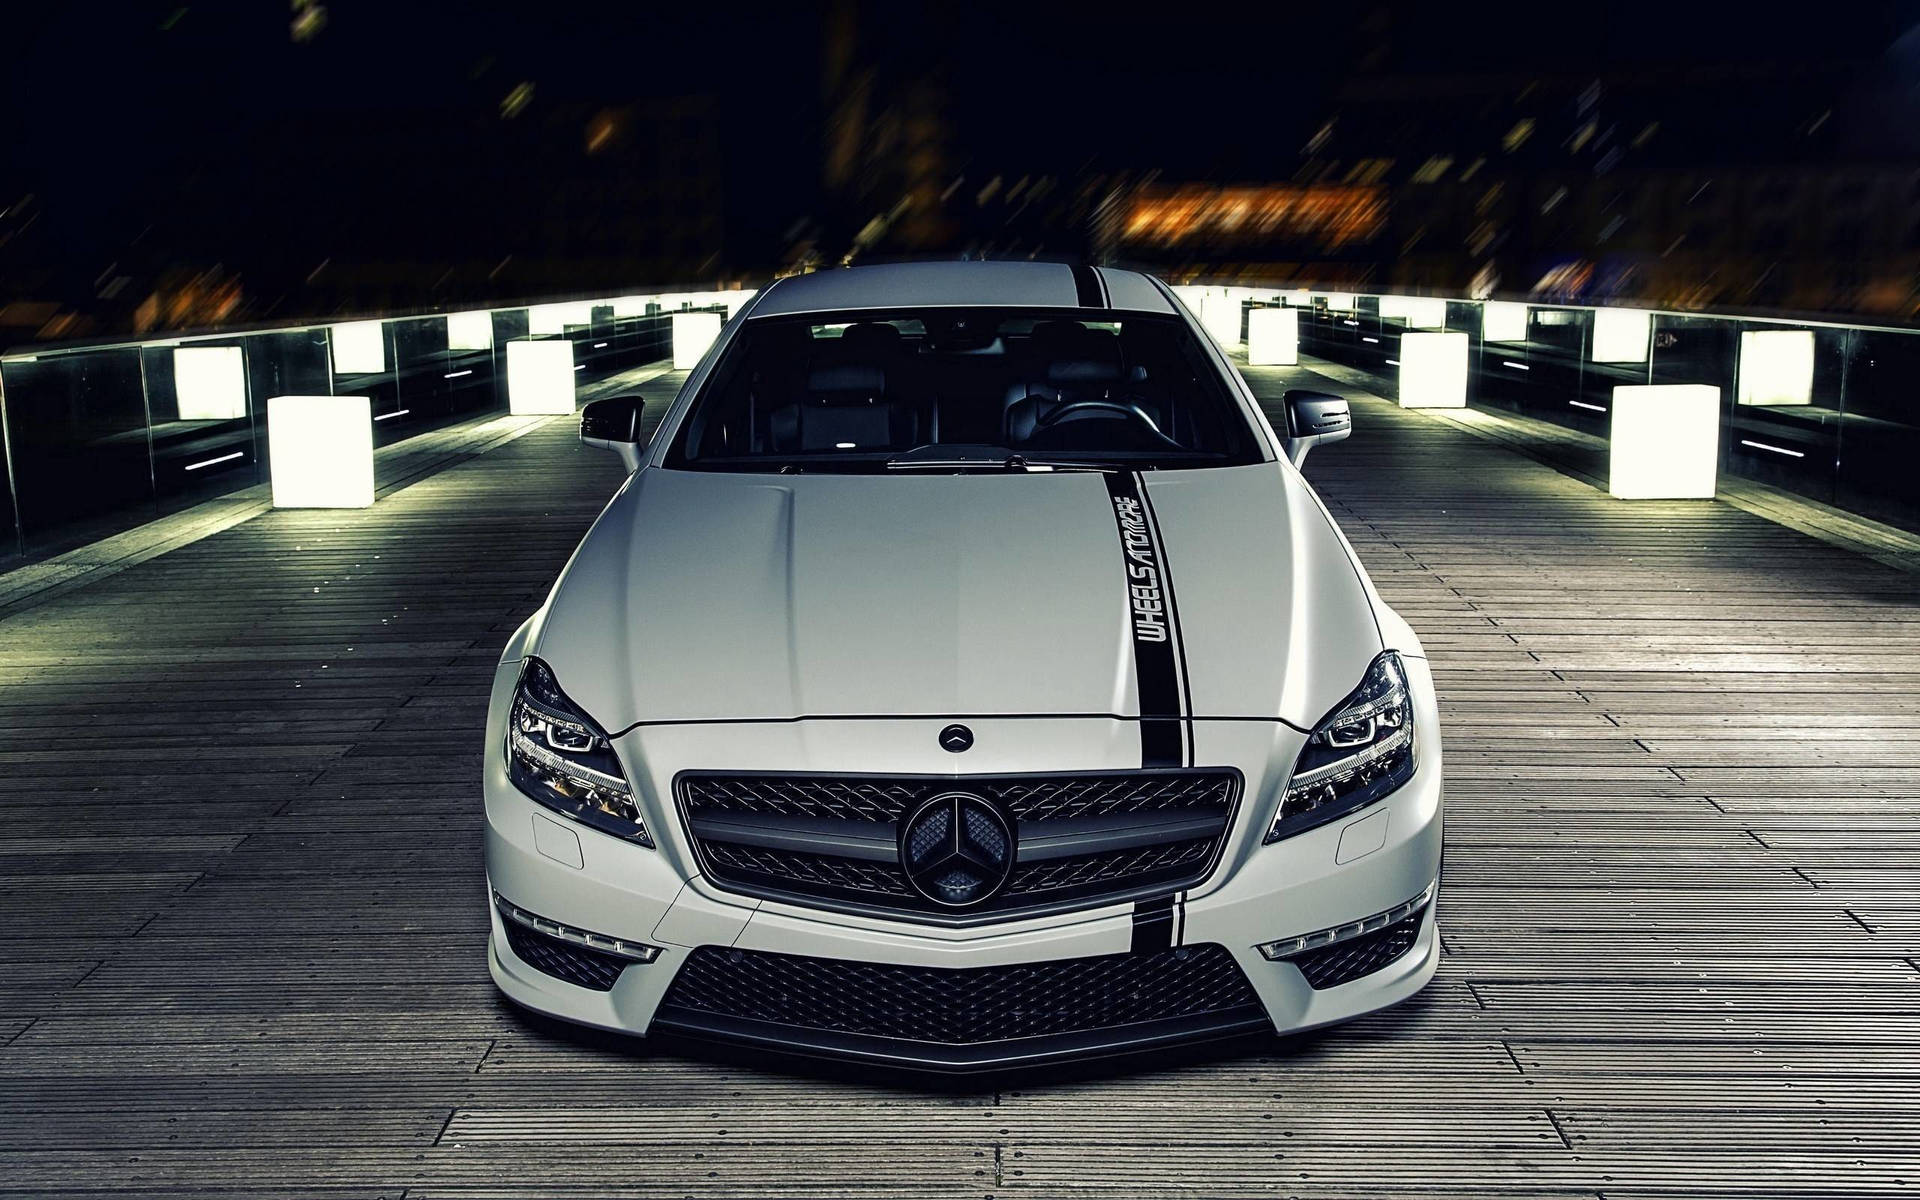 Captivating Night-time Prowess of White AMG Wallpaper